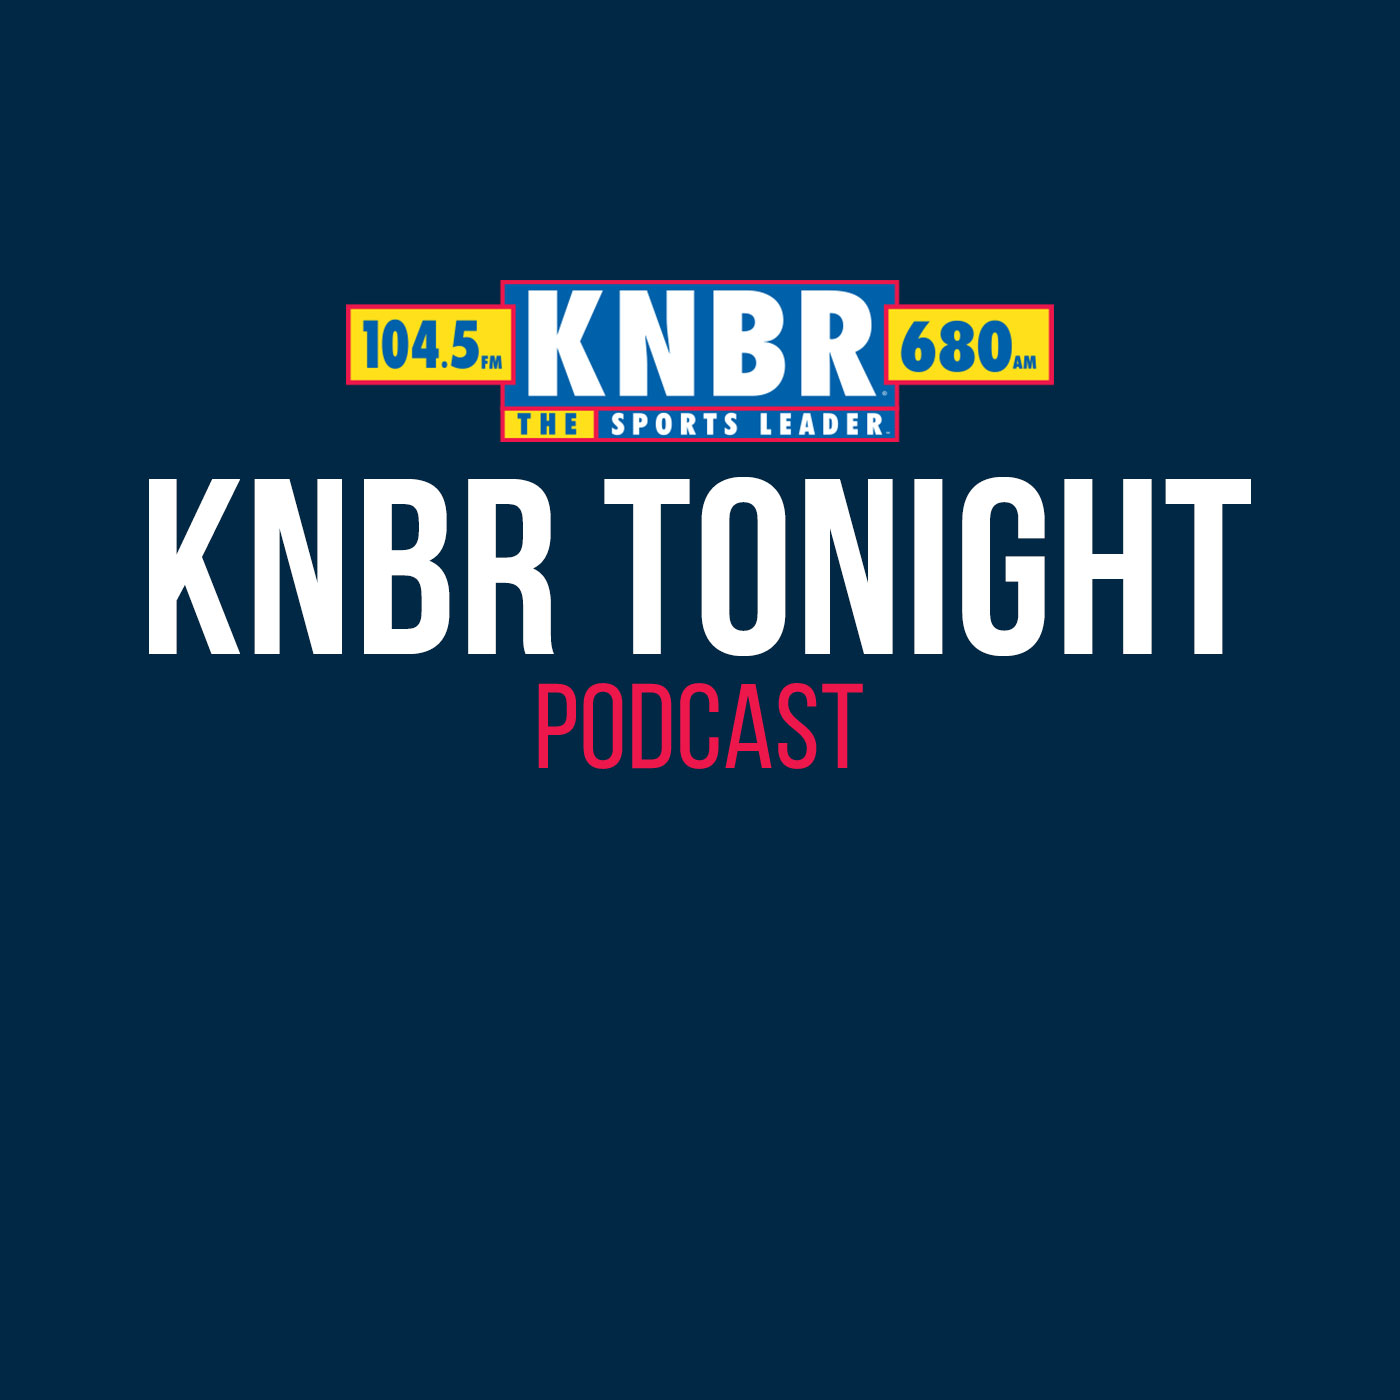 1-21 Marc Delucchi joins KNBR Tonight with Kerry Crowley to talk about the keys for the 49ers to beat the Packers tomorrow